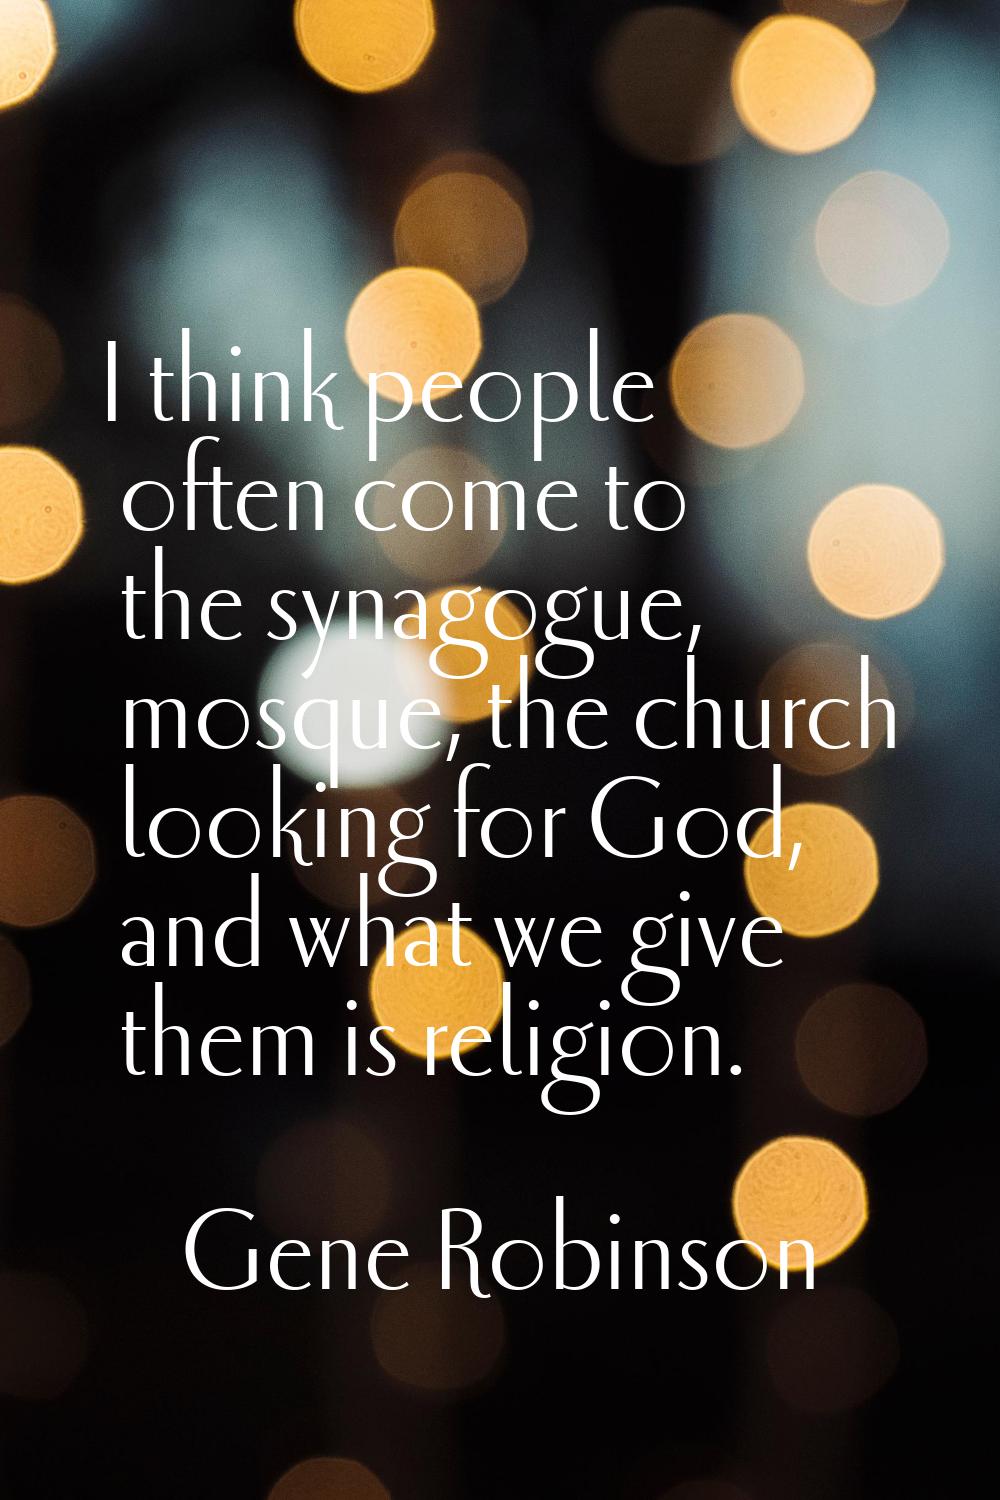 I think people often come to the synagogue, mosque, the church looking for God, and what we give th